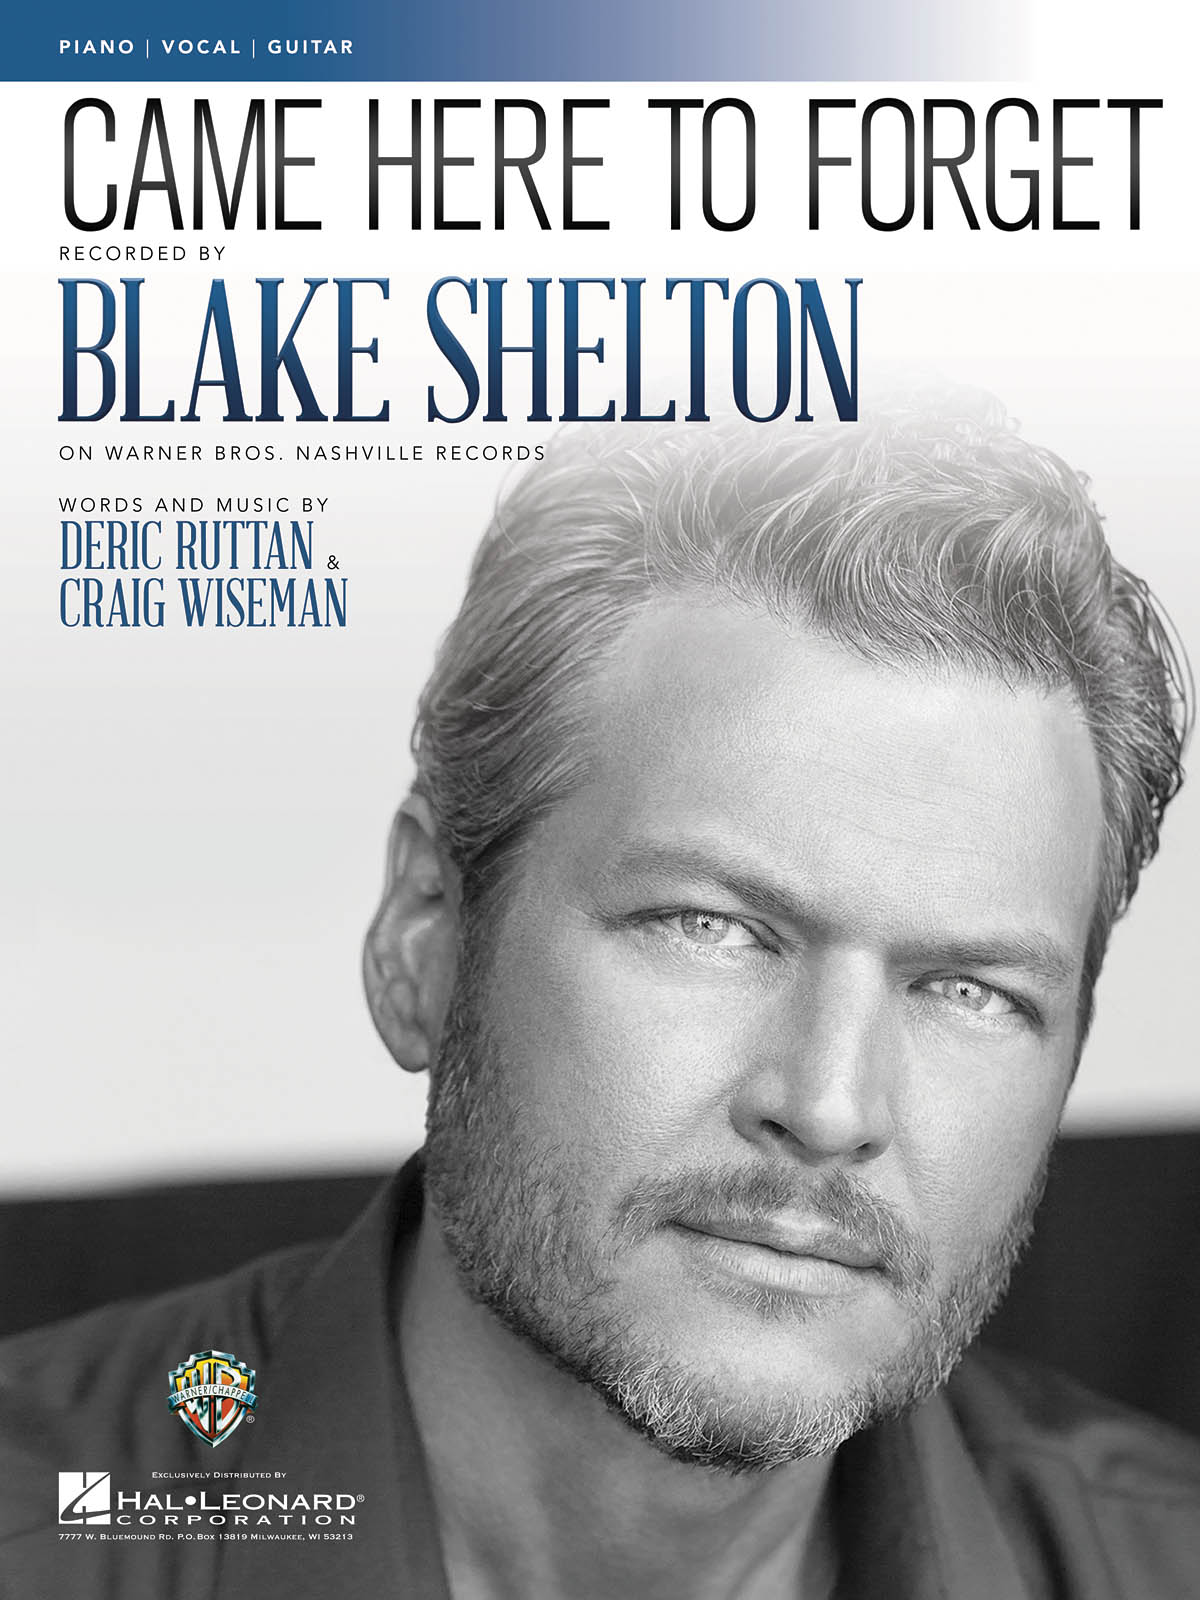 Blake Shelton: Came Here to Forget: Piano  Vocal and Guitar: Single Sheet